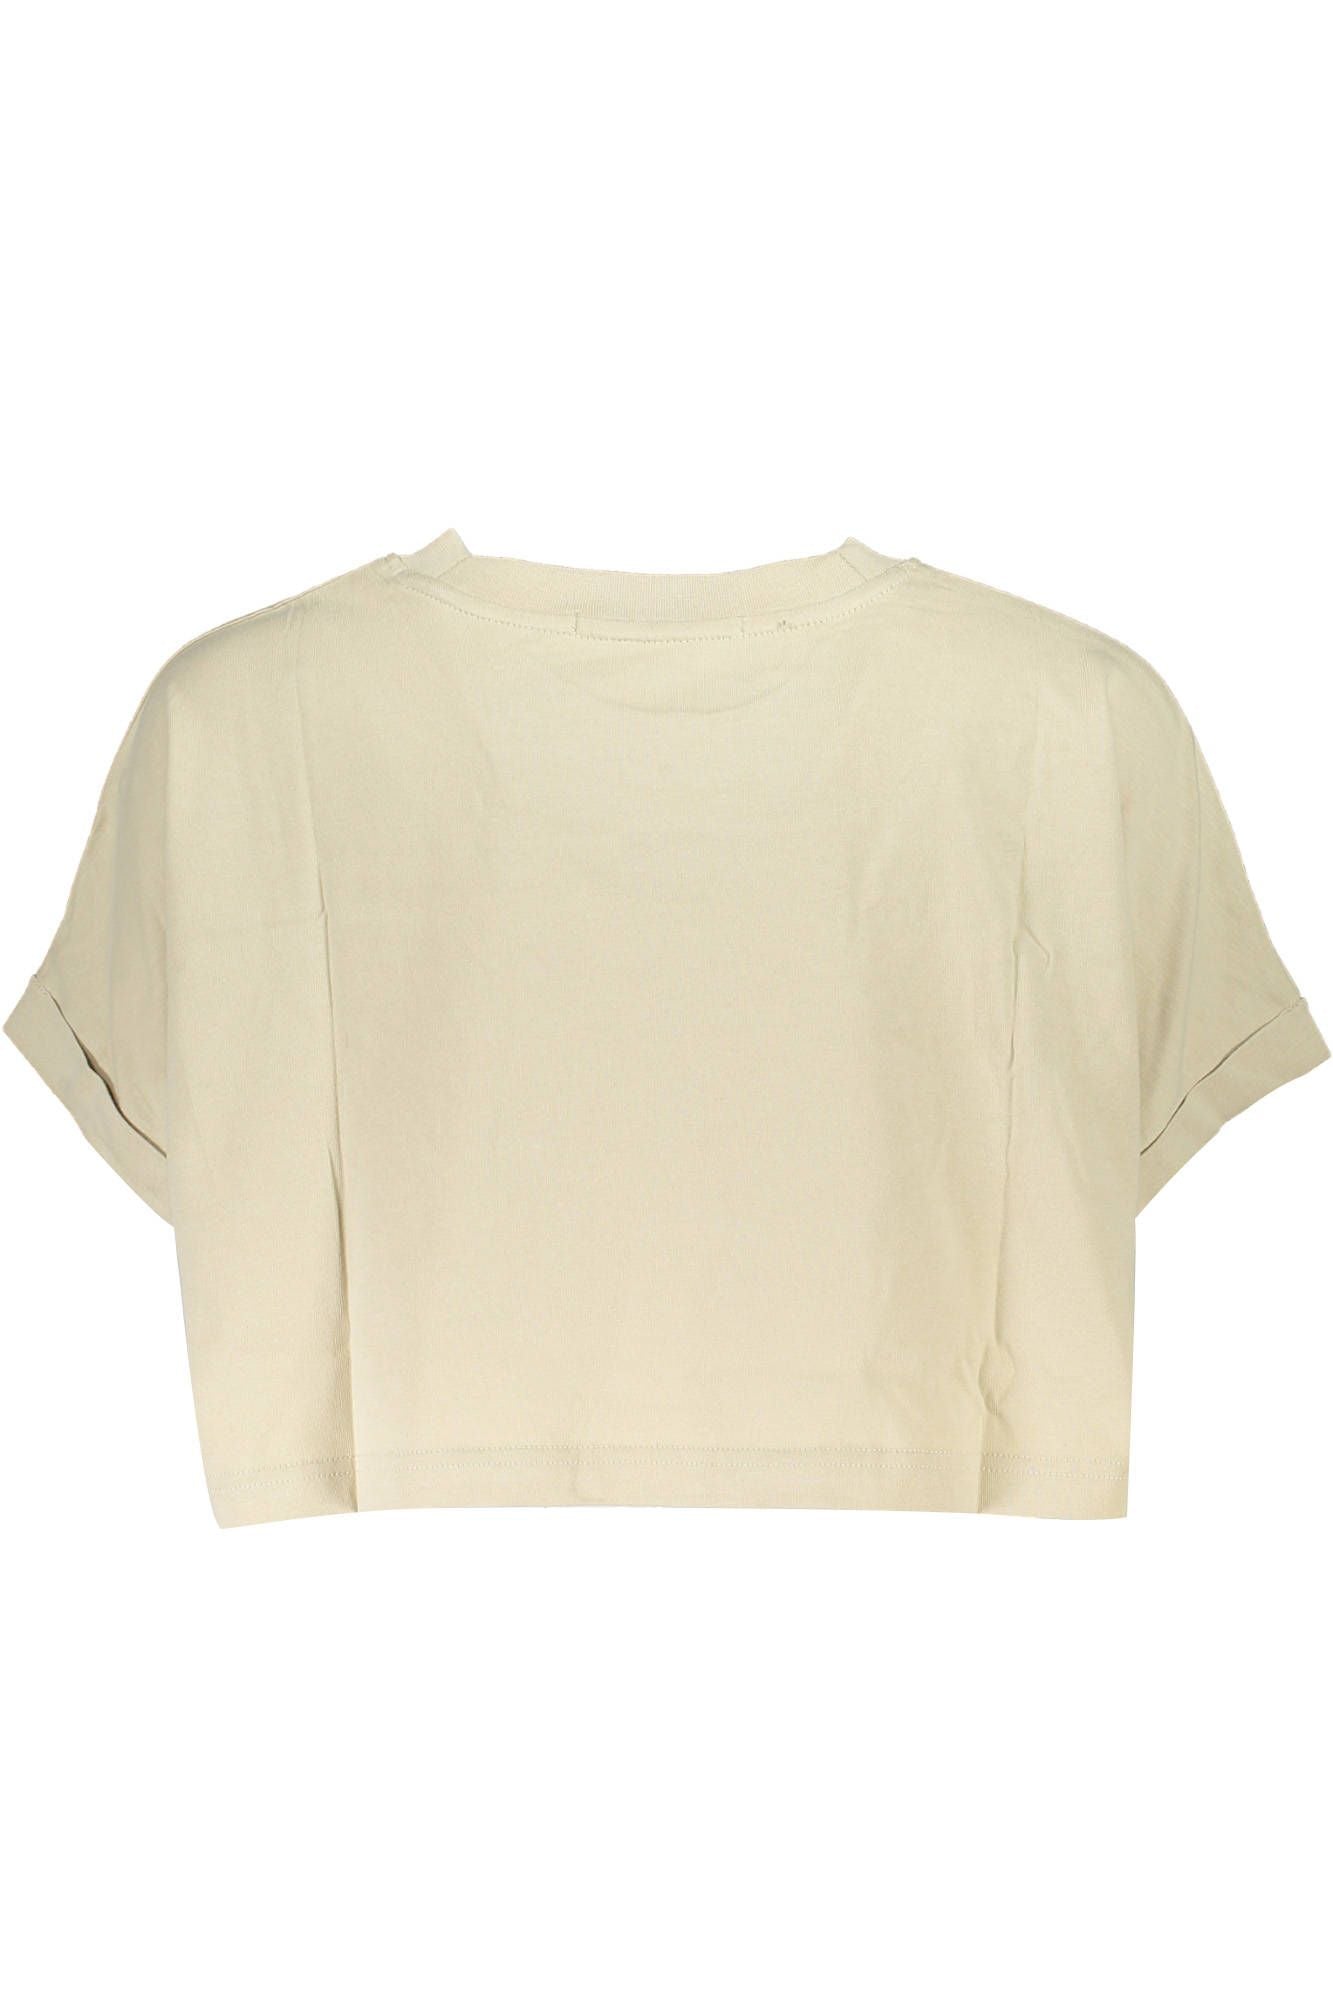 Chic Beige Embroidered Logo Tee